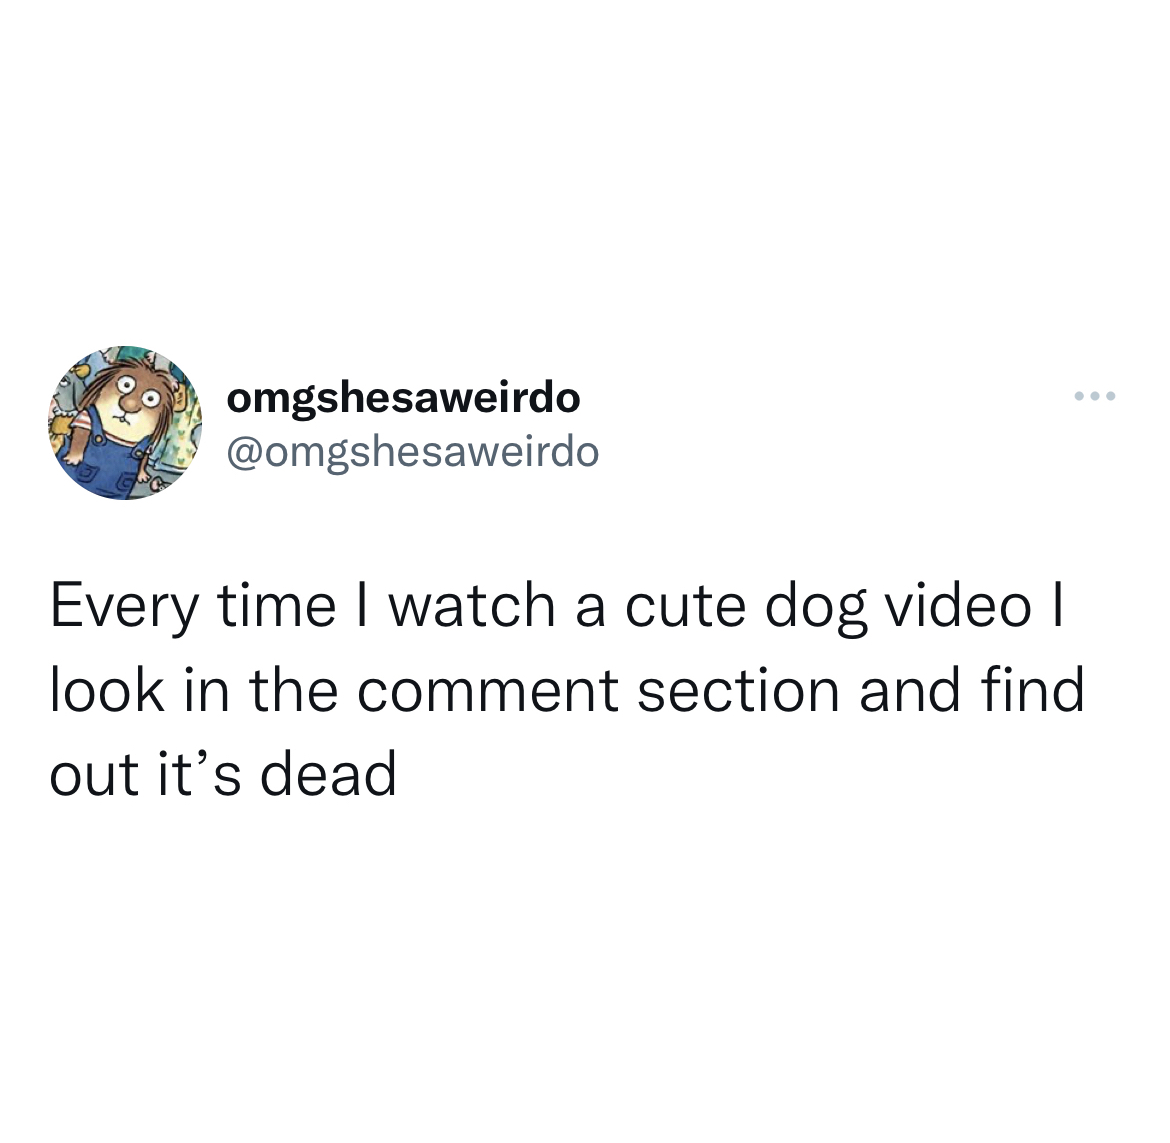 Funny and Fresh Tweets - Photograph - omgshesaweirdo Every time I watch a cute dog video I look in the comment section and find out it's dead